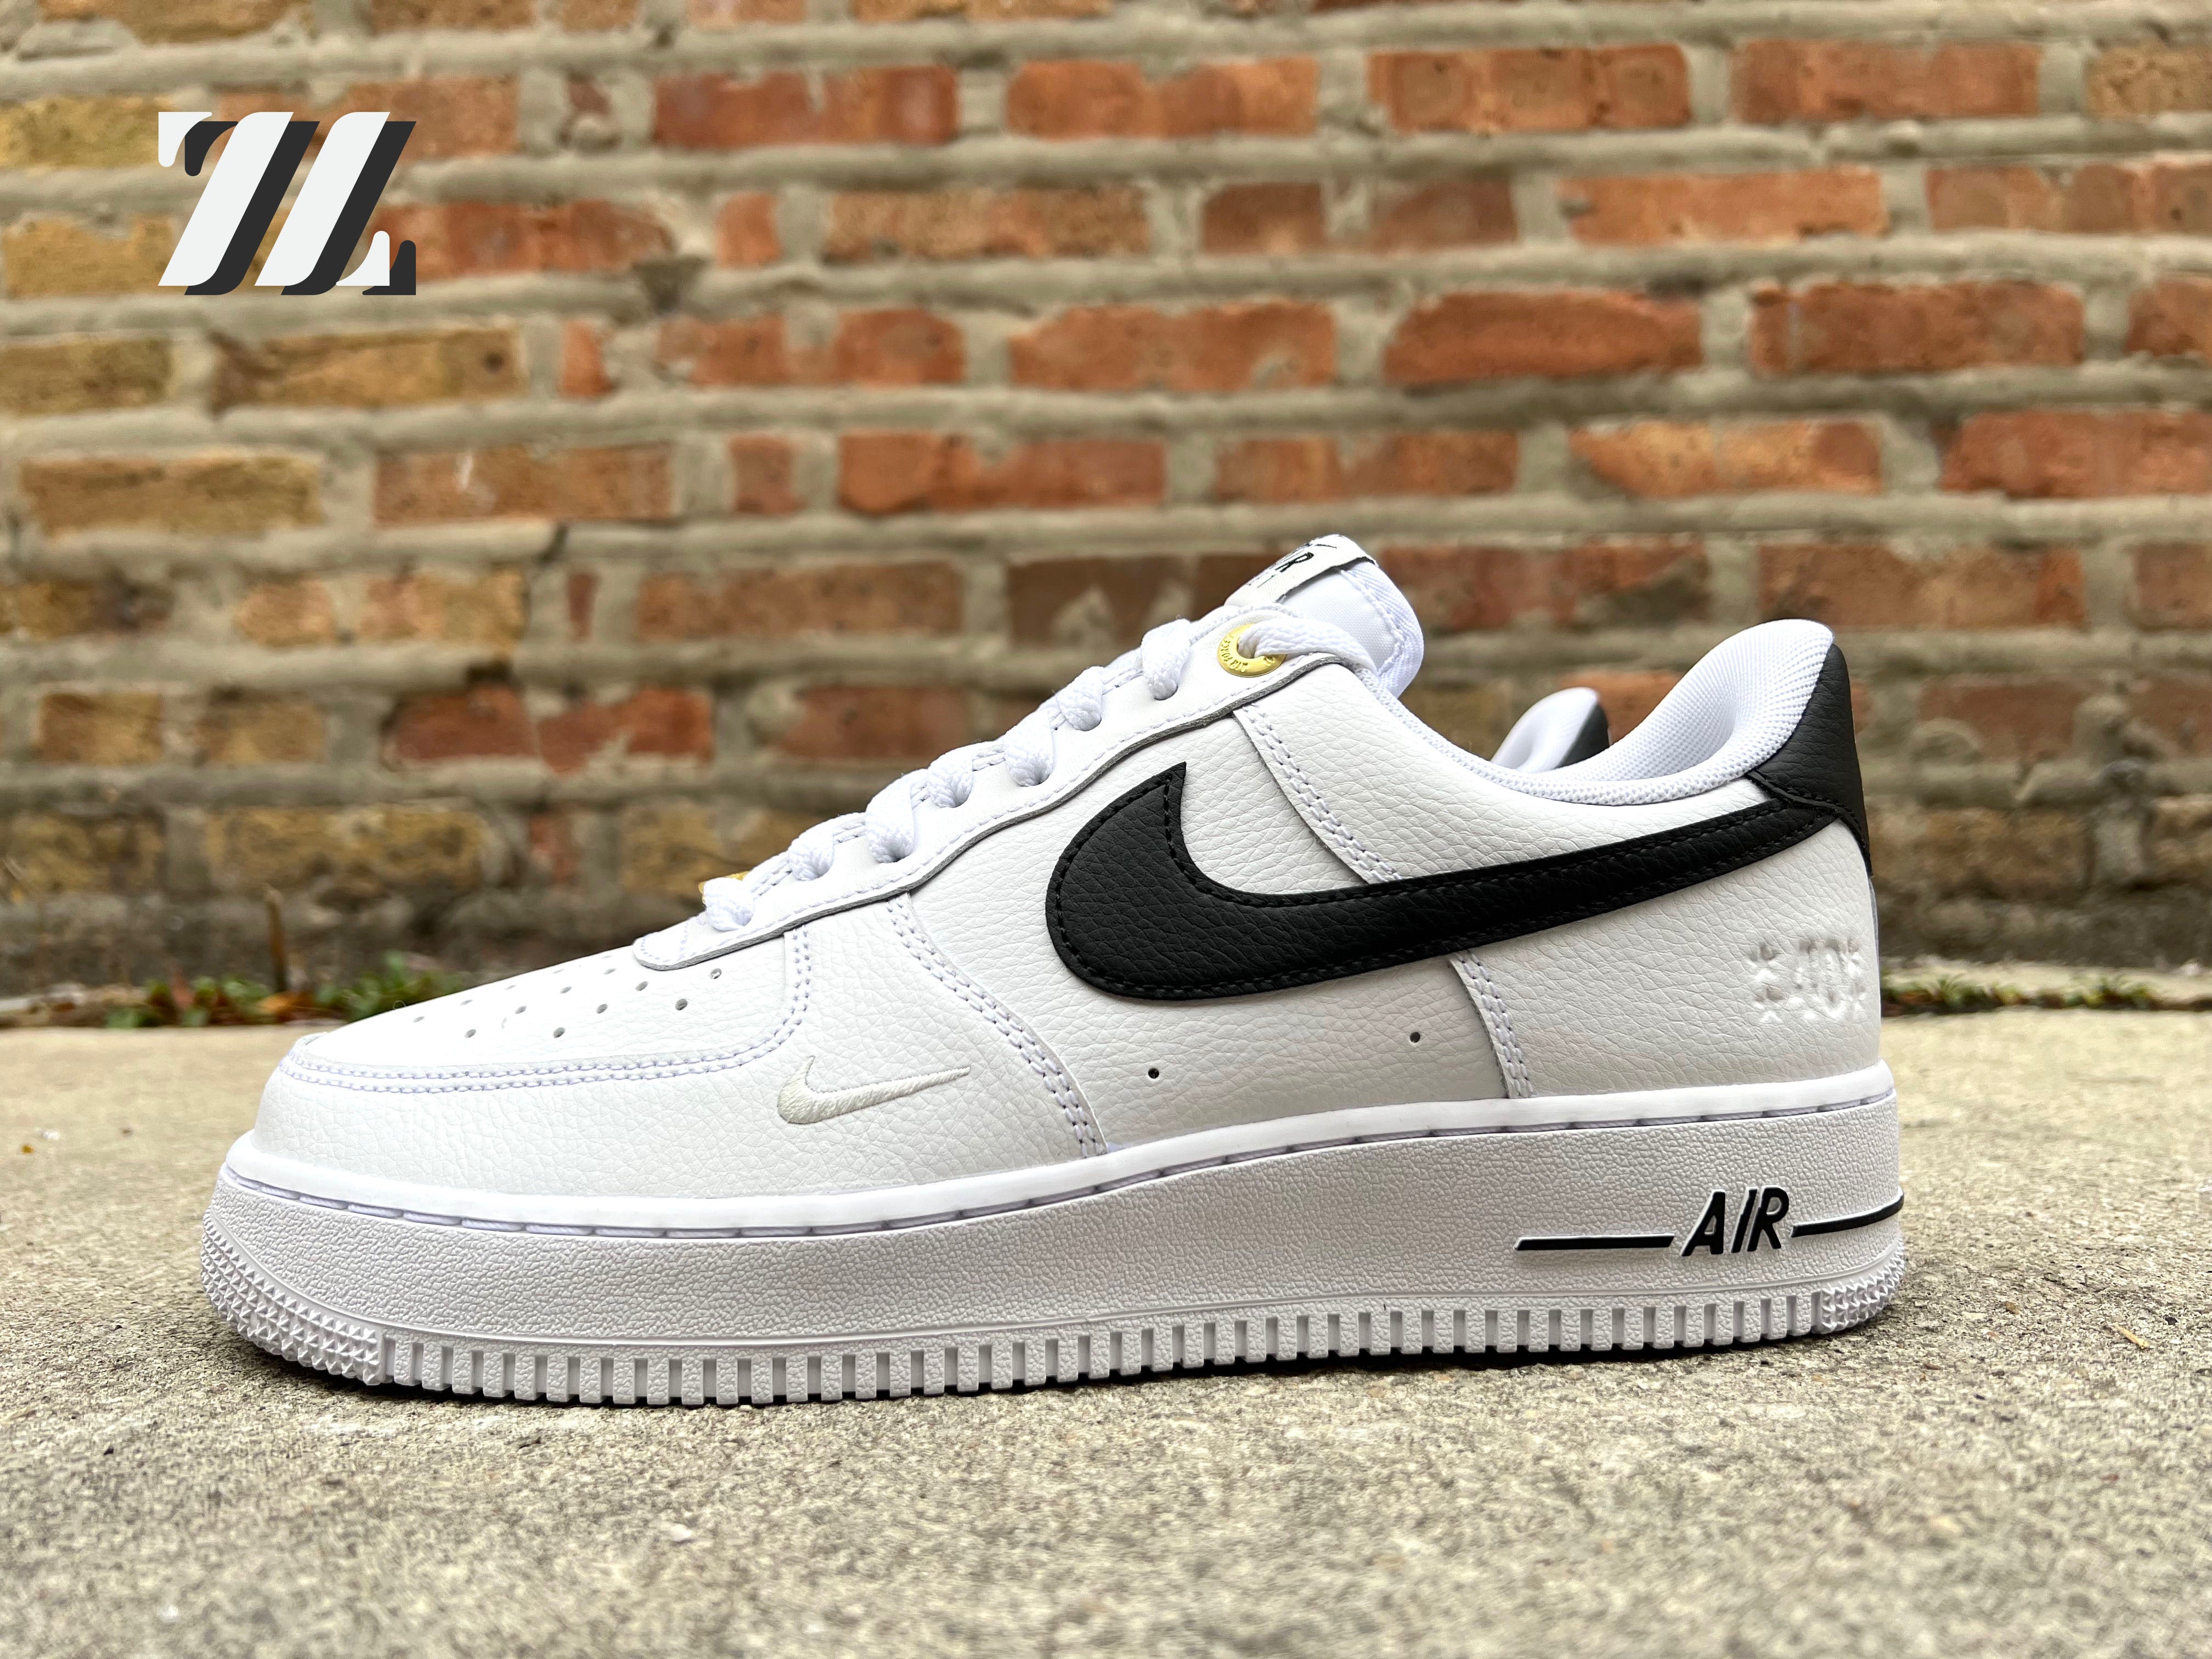 Anormal Gobernar medianoche Men's Nike Air Force 1 '07 LV8 – SUCCEZZ BY B&VDOT